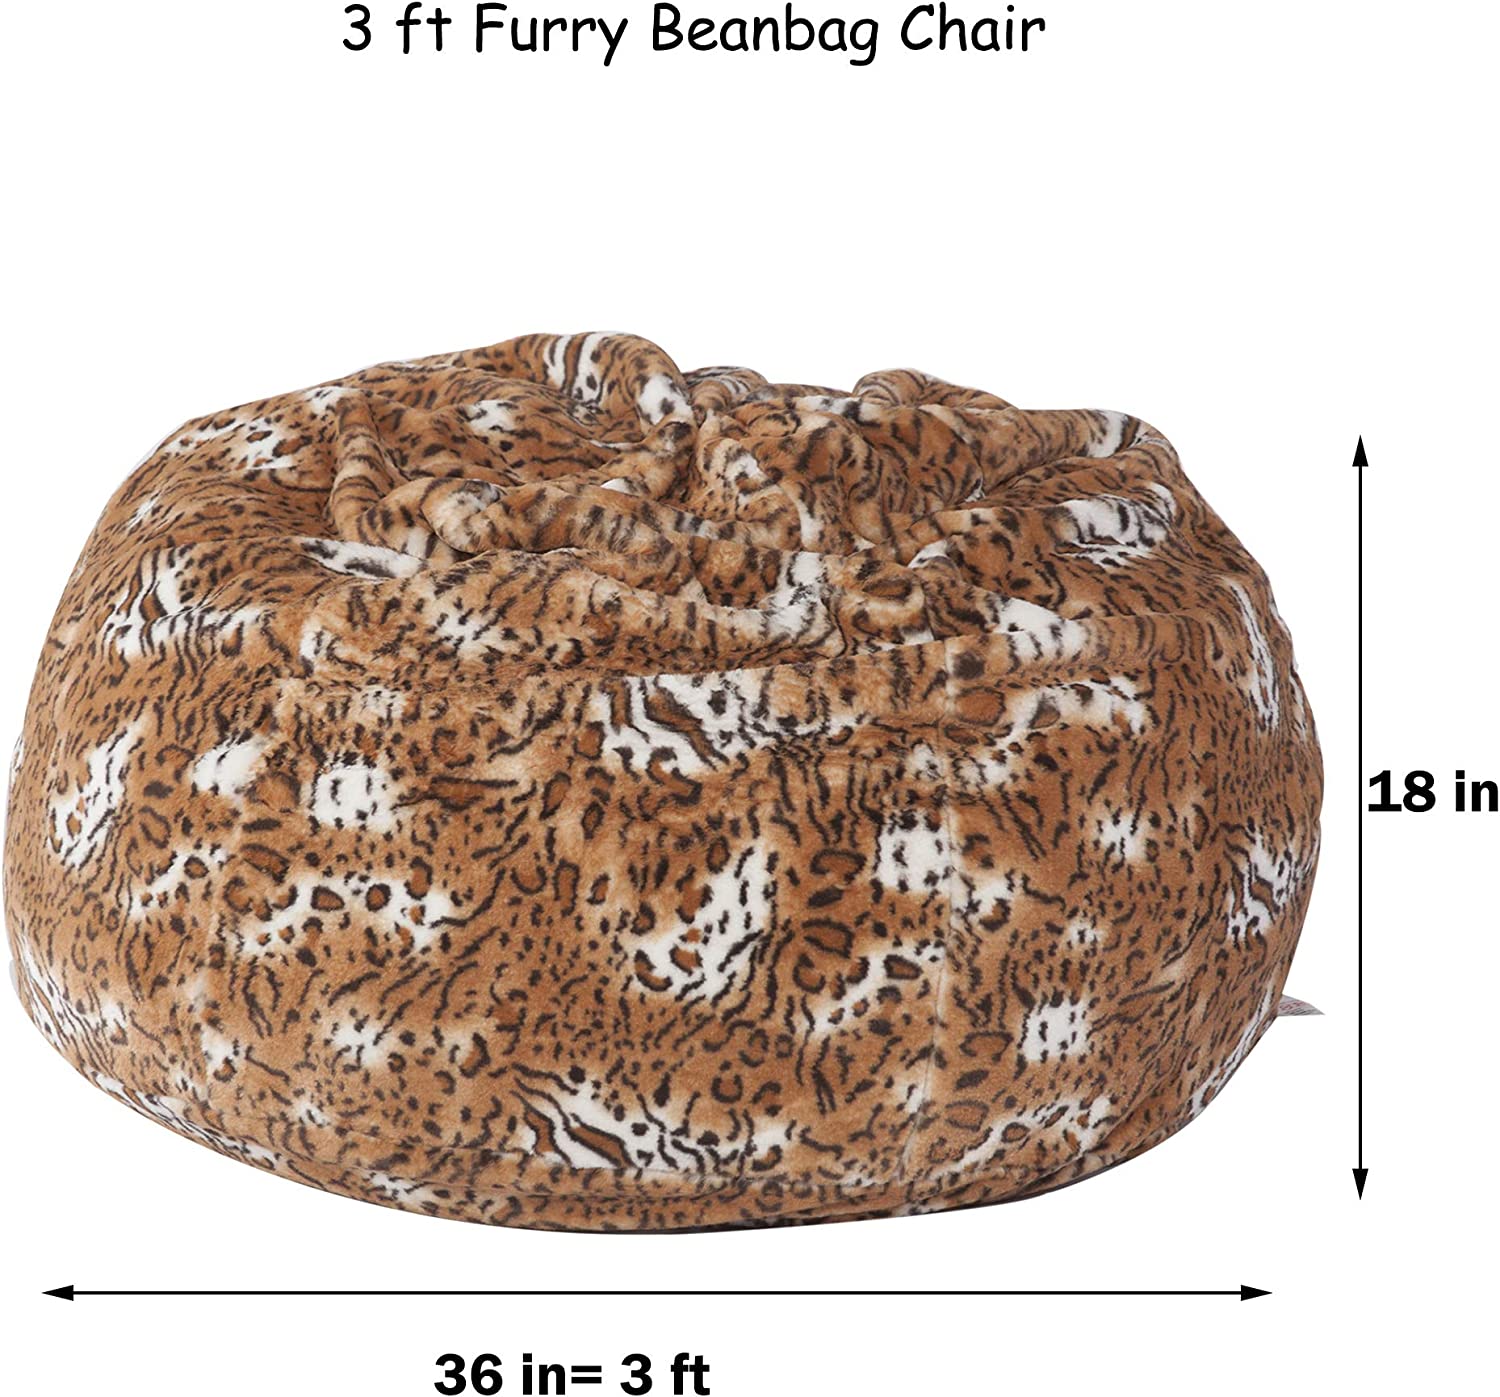 Luxury and Comfy Bean Bag Chair Big Beanless Bag Chairs Soft Sofa Lounger, Sponge Filling, Leopard Print